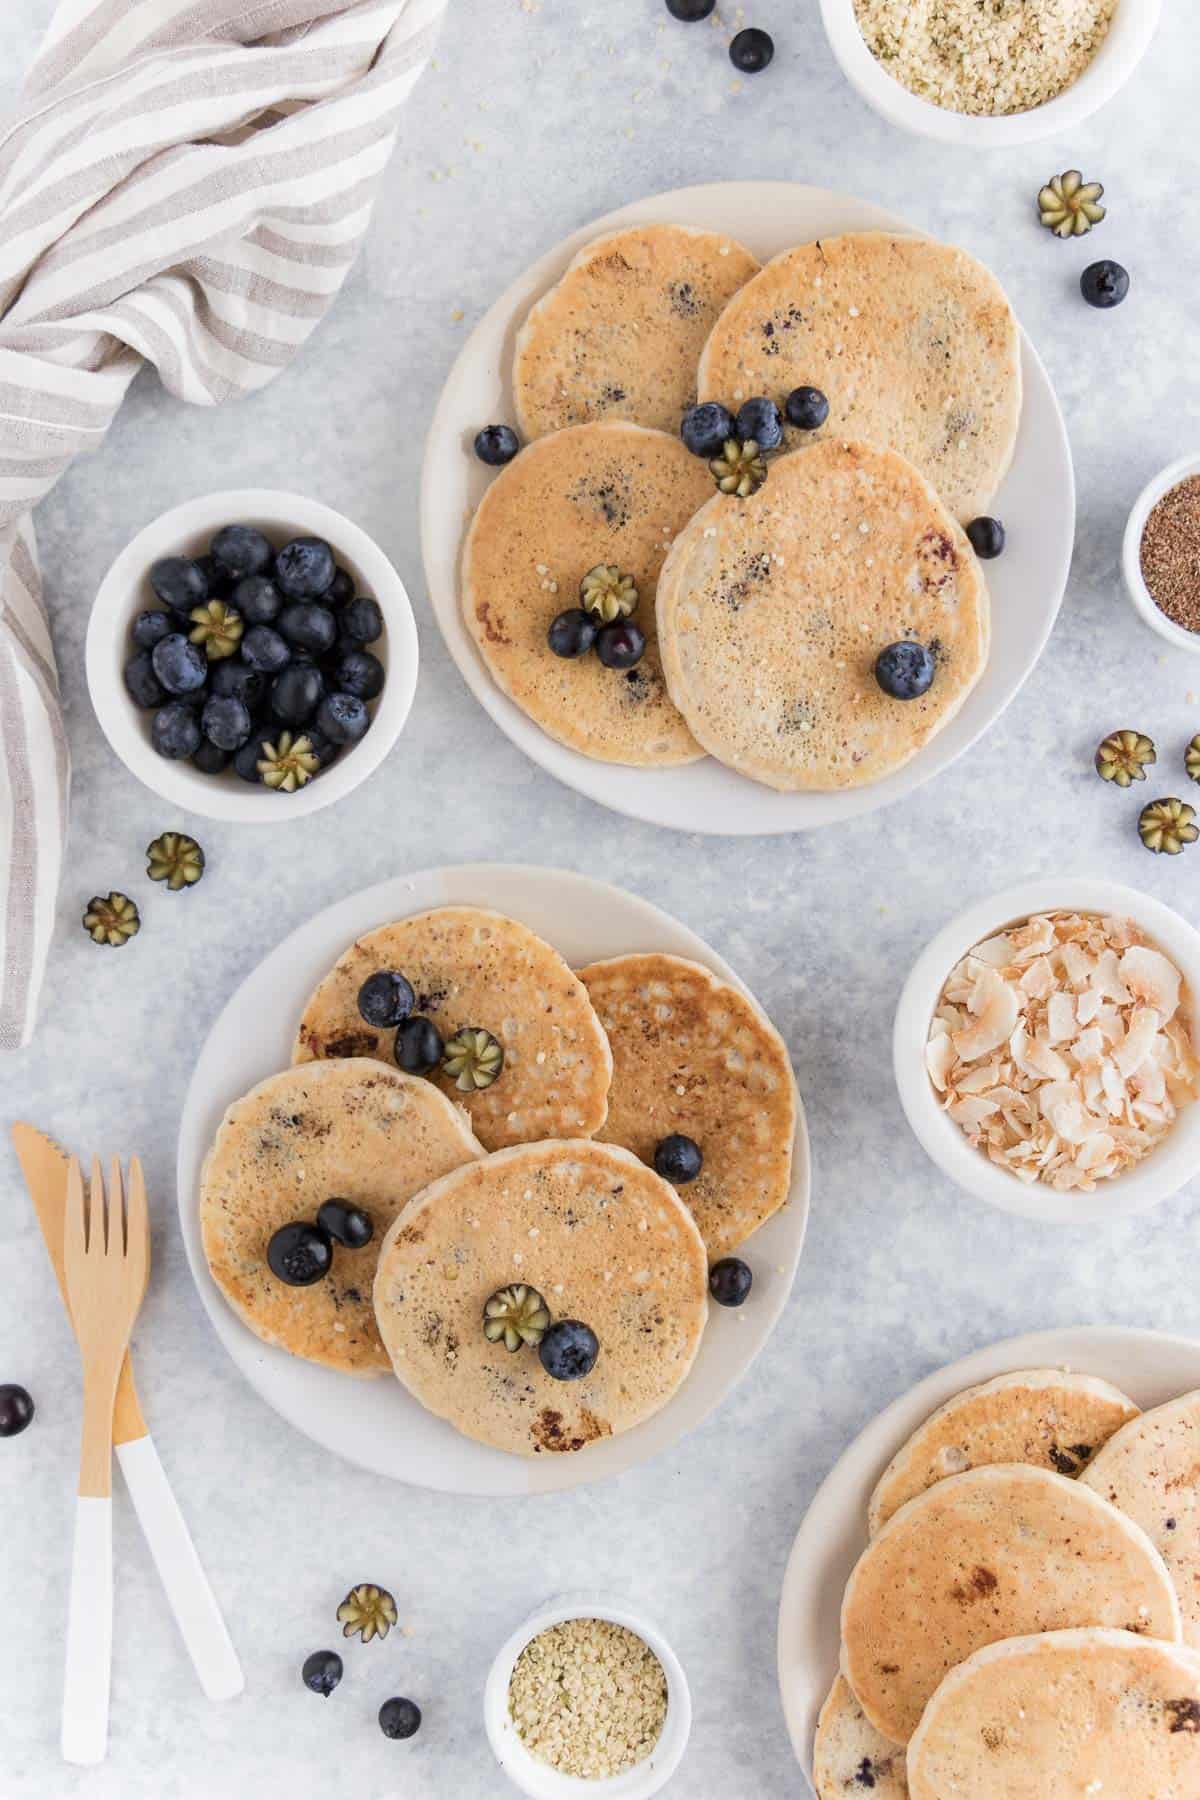 pancakes laying on two plates surrounded by blueberries, hemp seeds, and coconut flakes